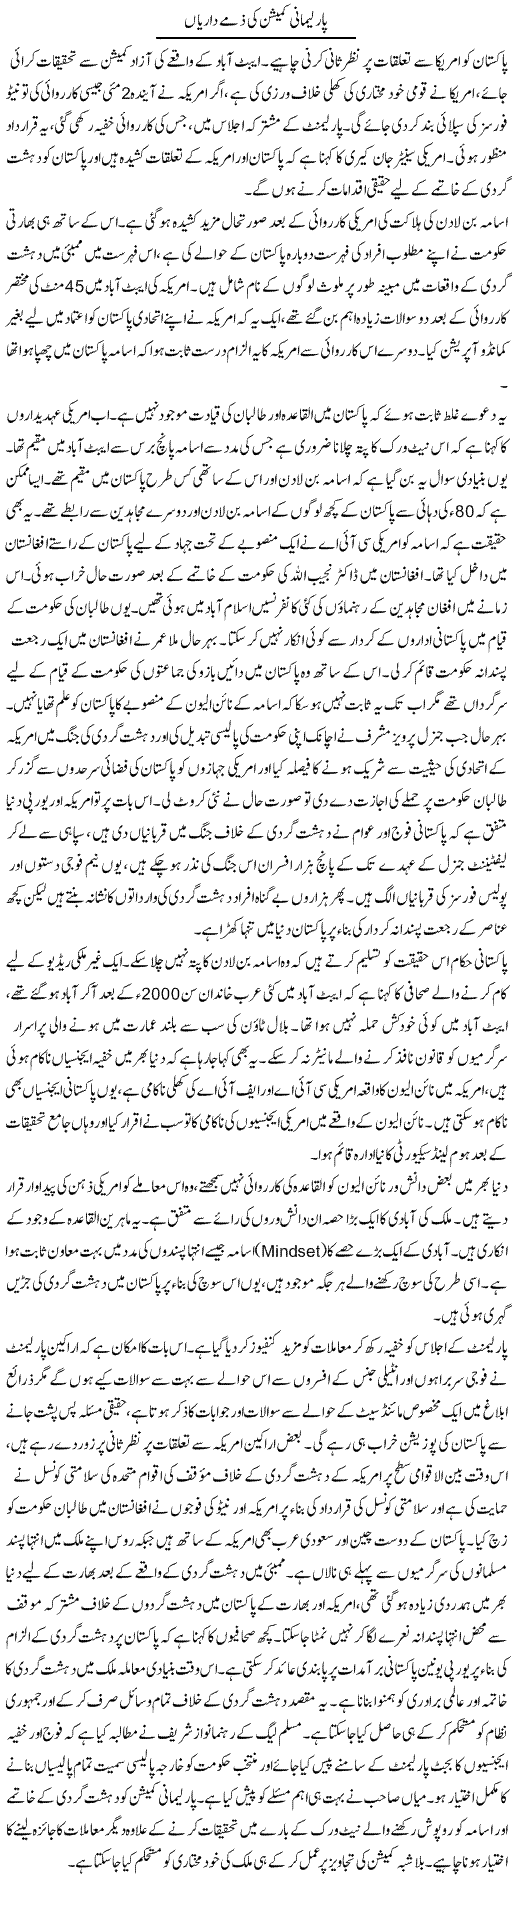 Parliamentary Commission Express Column Tauseef Ahmed 18 May 2011